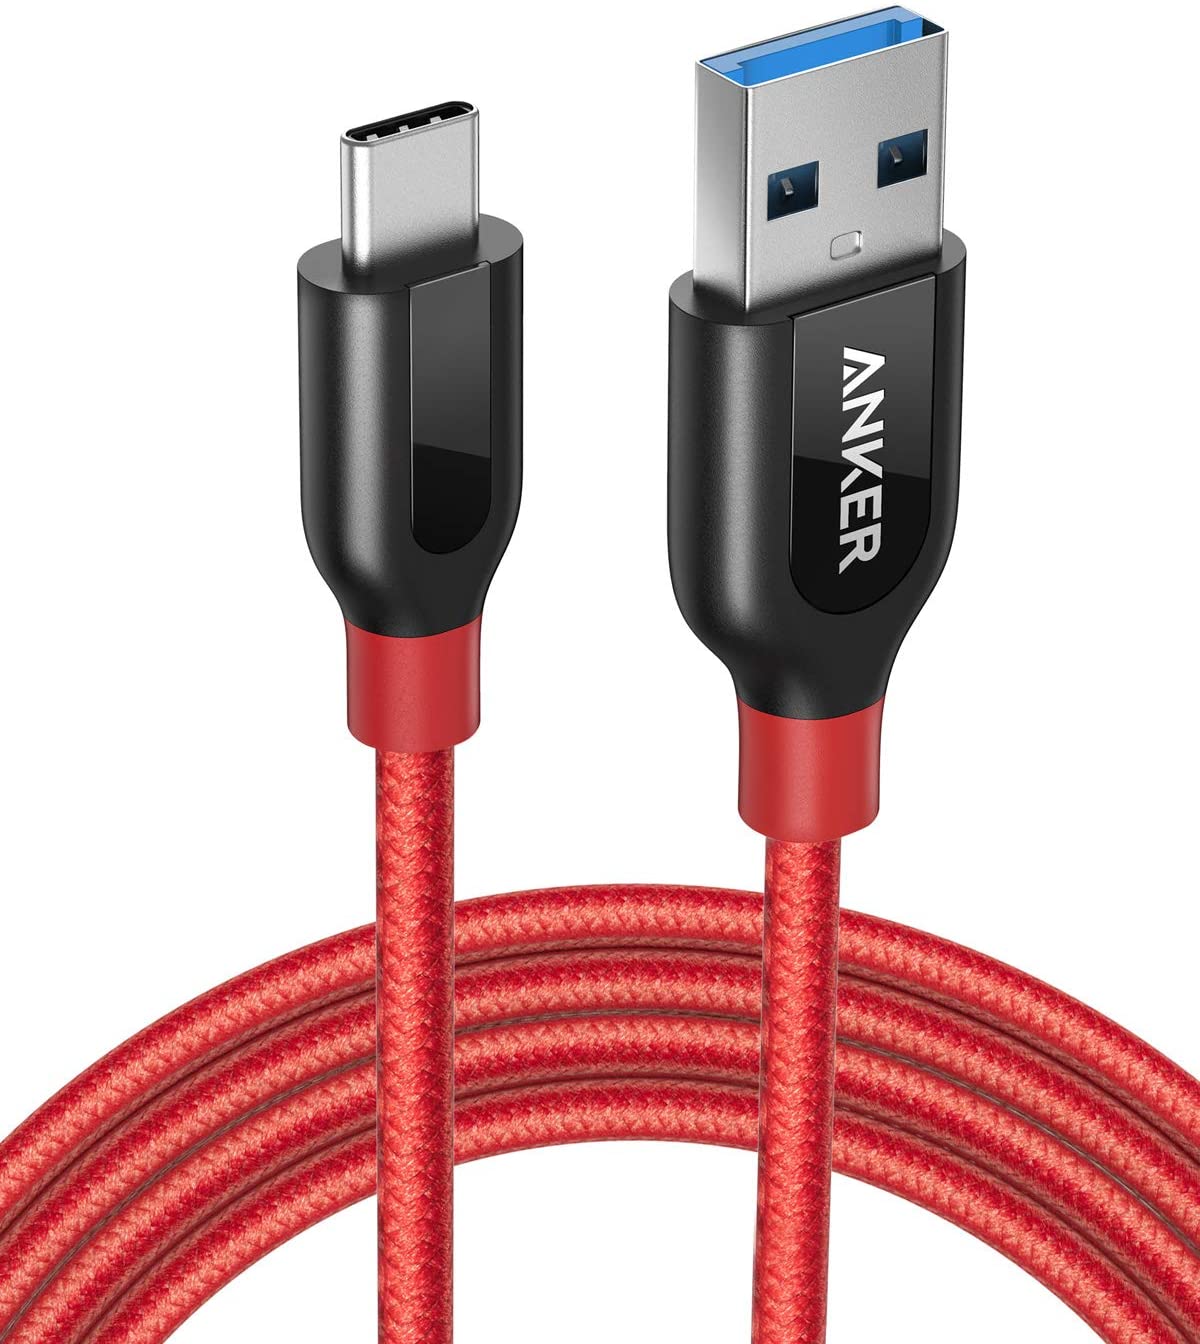 Photos - Cable (video, audio, USB) ANKER Powerline+ USB C to USB 3.0 Cable  Red / 6ft A8169091 (3ft, 6ft)